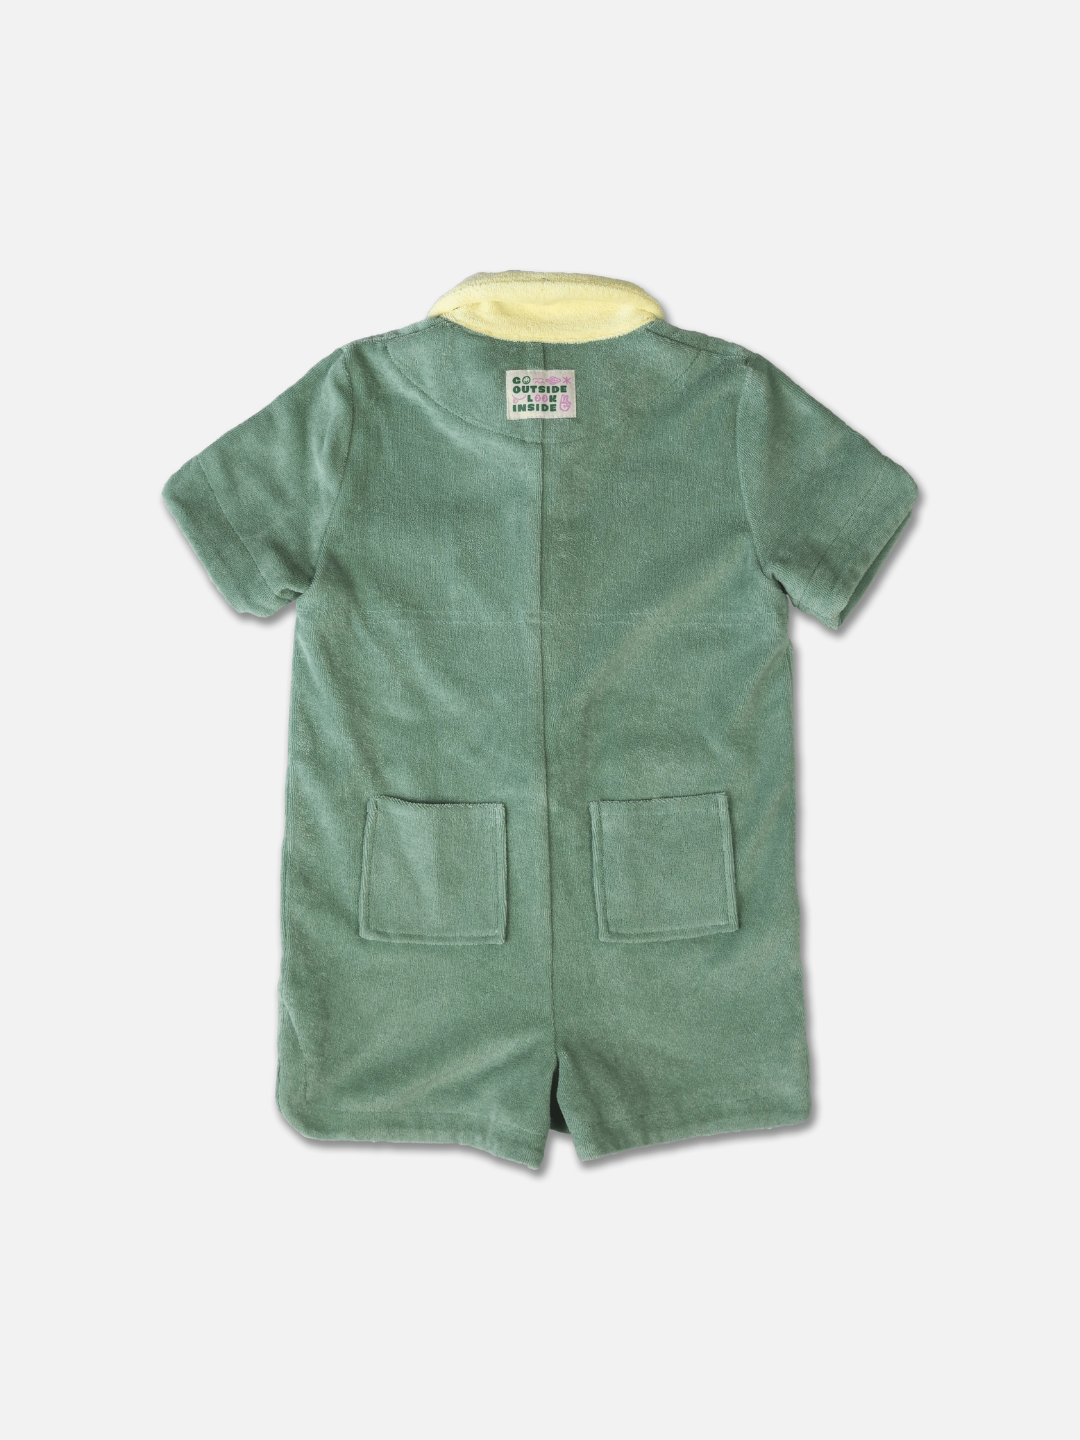 A pale green kids' jumpsuit with yellow collar and two back pockets, rear view